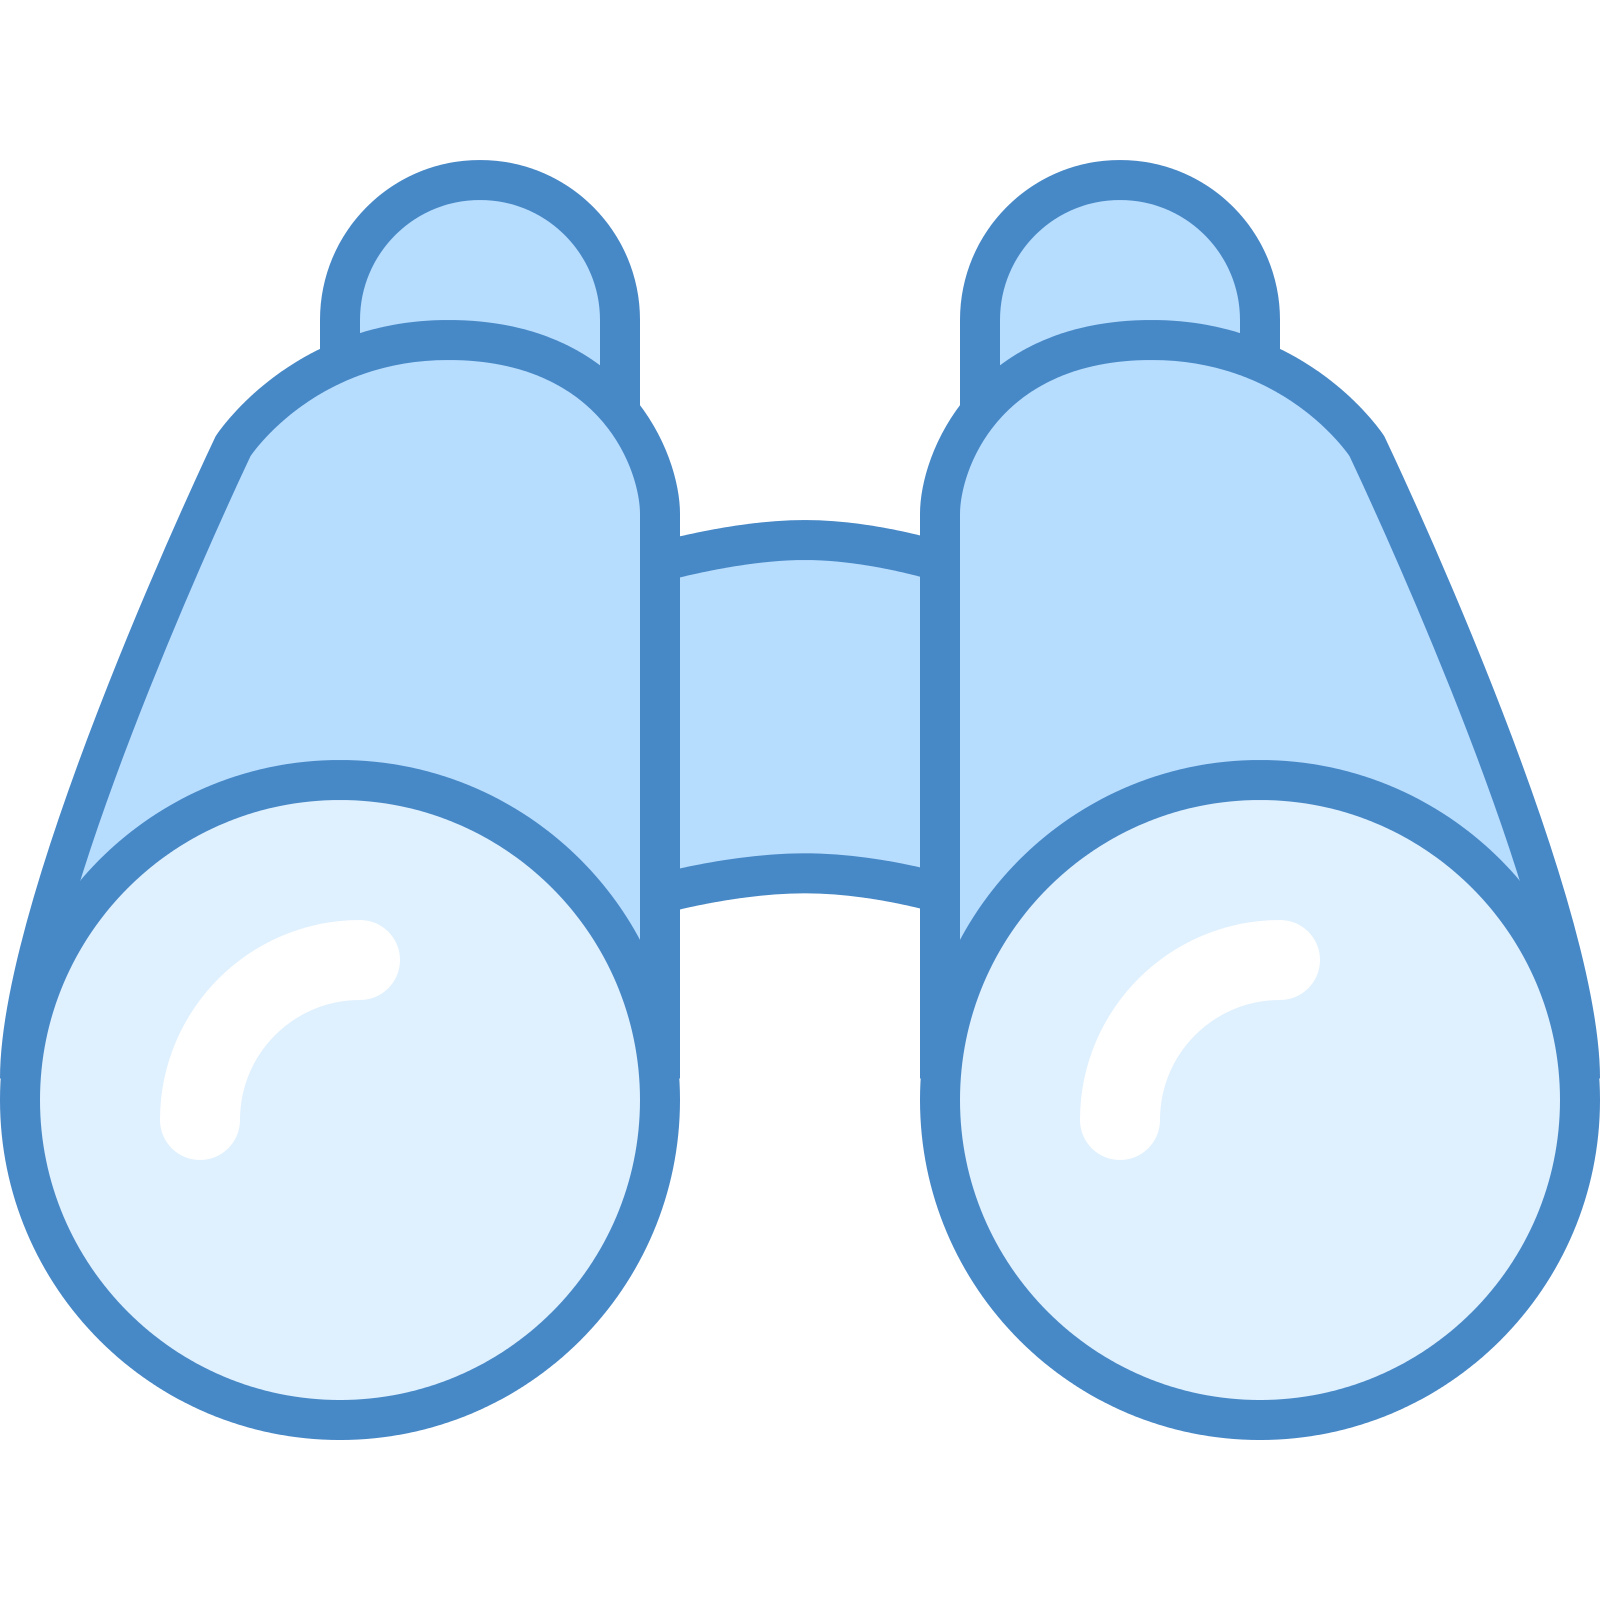 Binoculars clipart single. Icon free download at